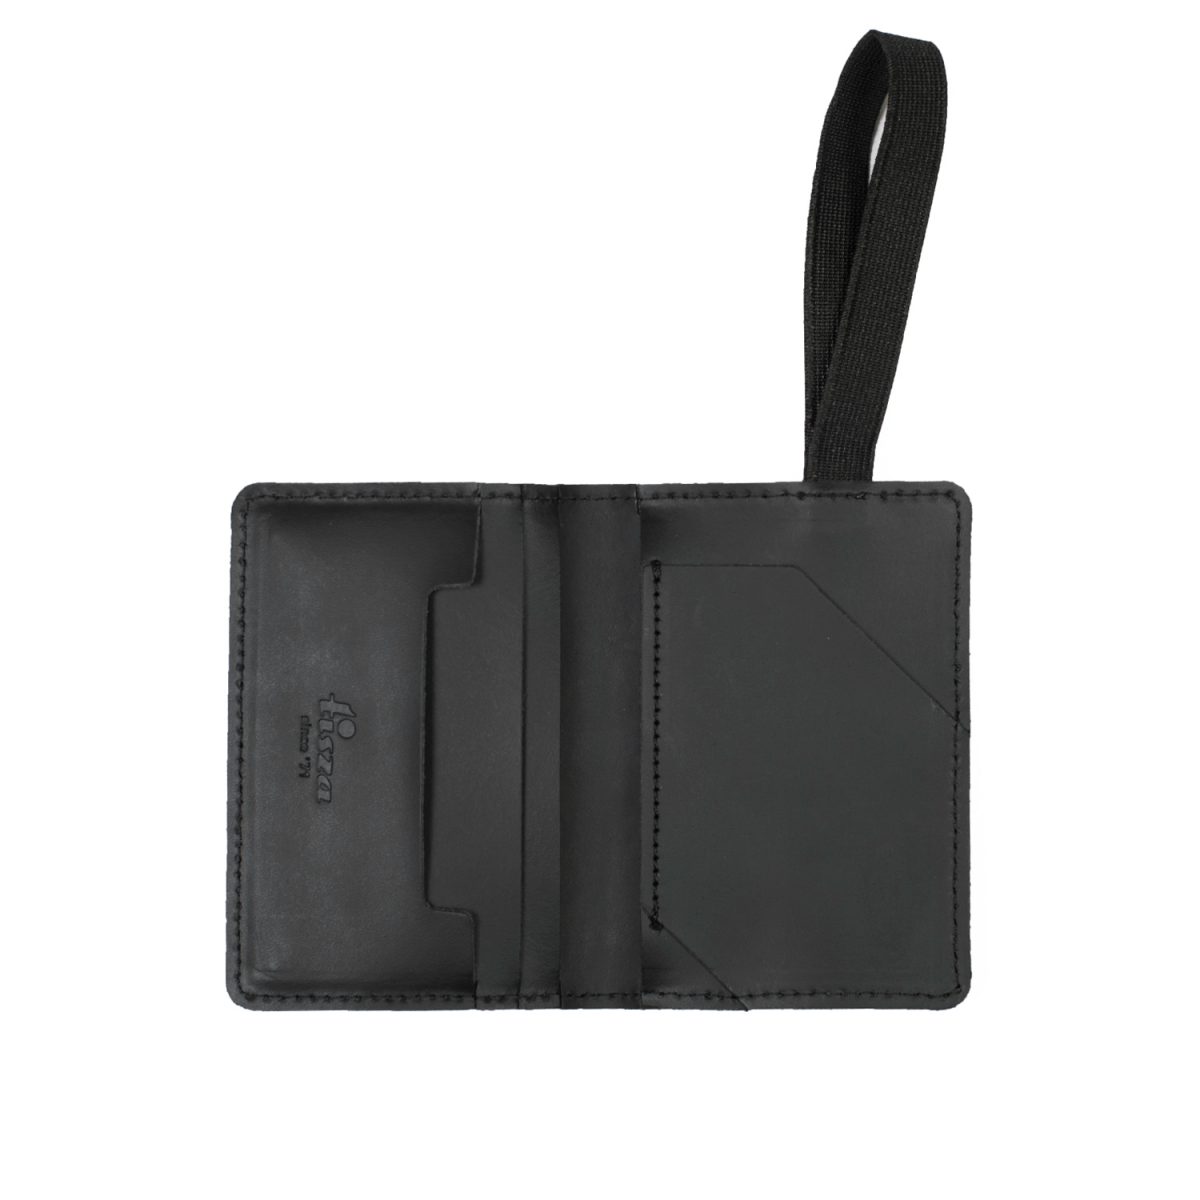 Tisza shoes-Purses- Leather card holder